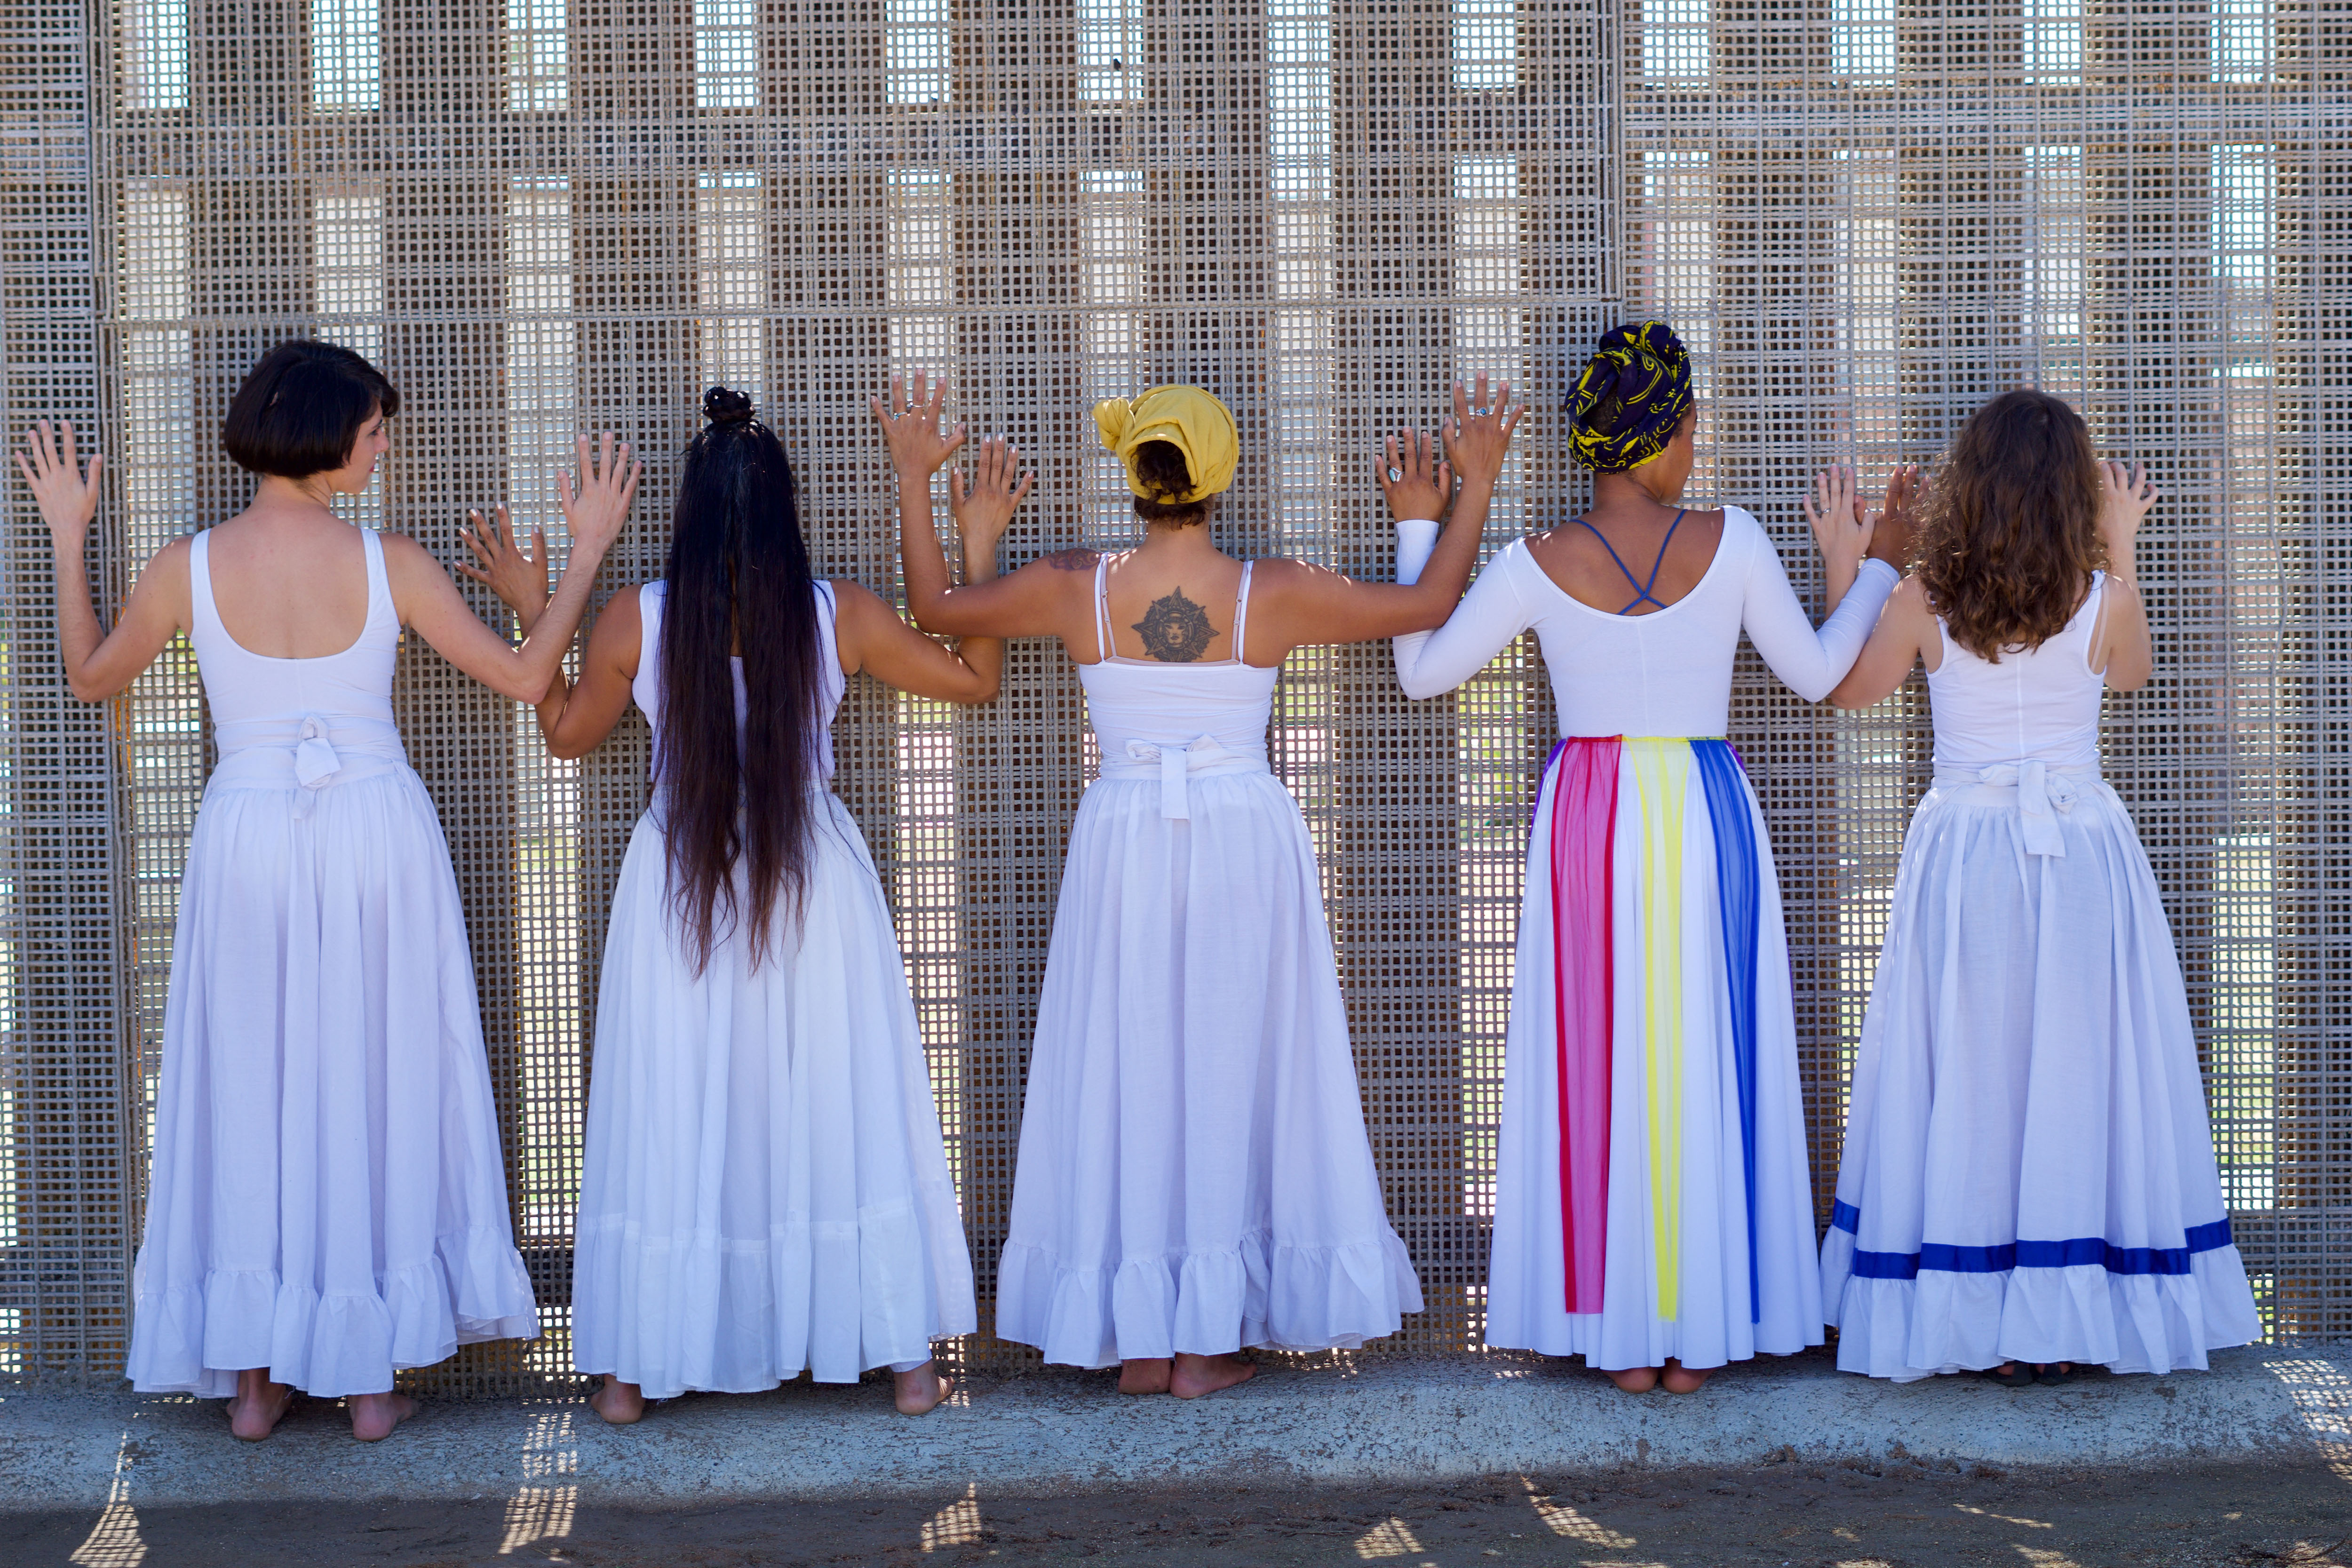 Dancers face a border wall at Friendship Park in San Diego 